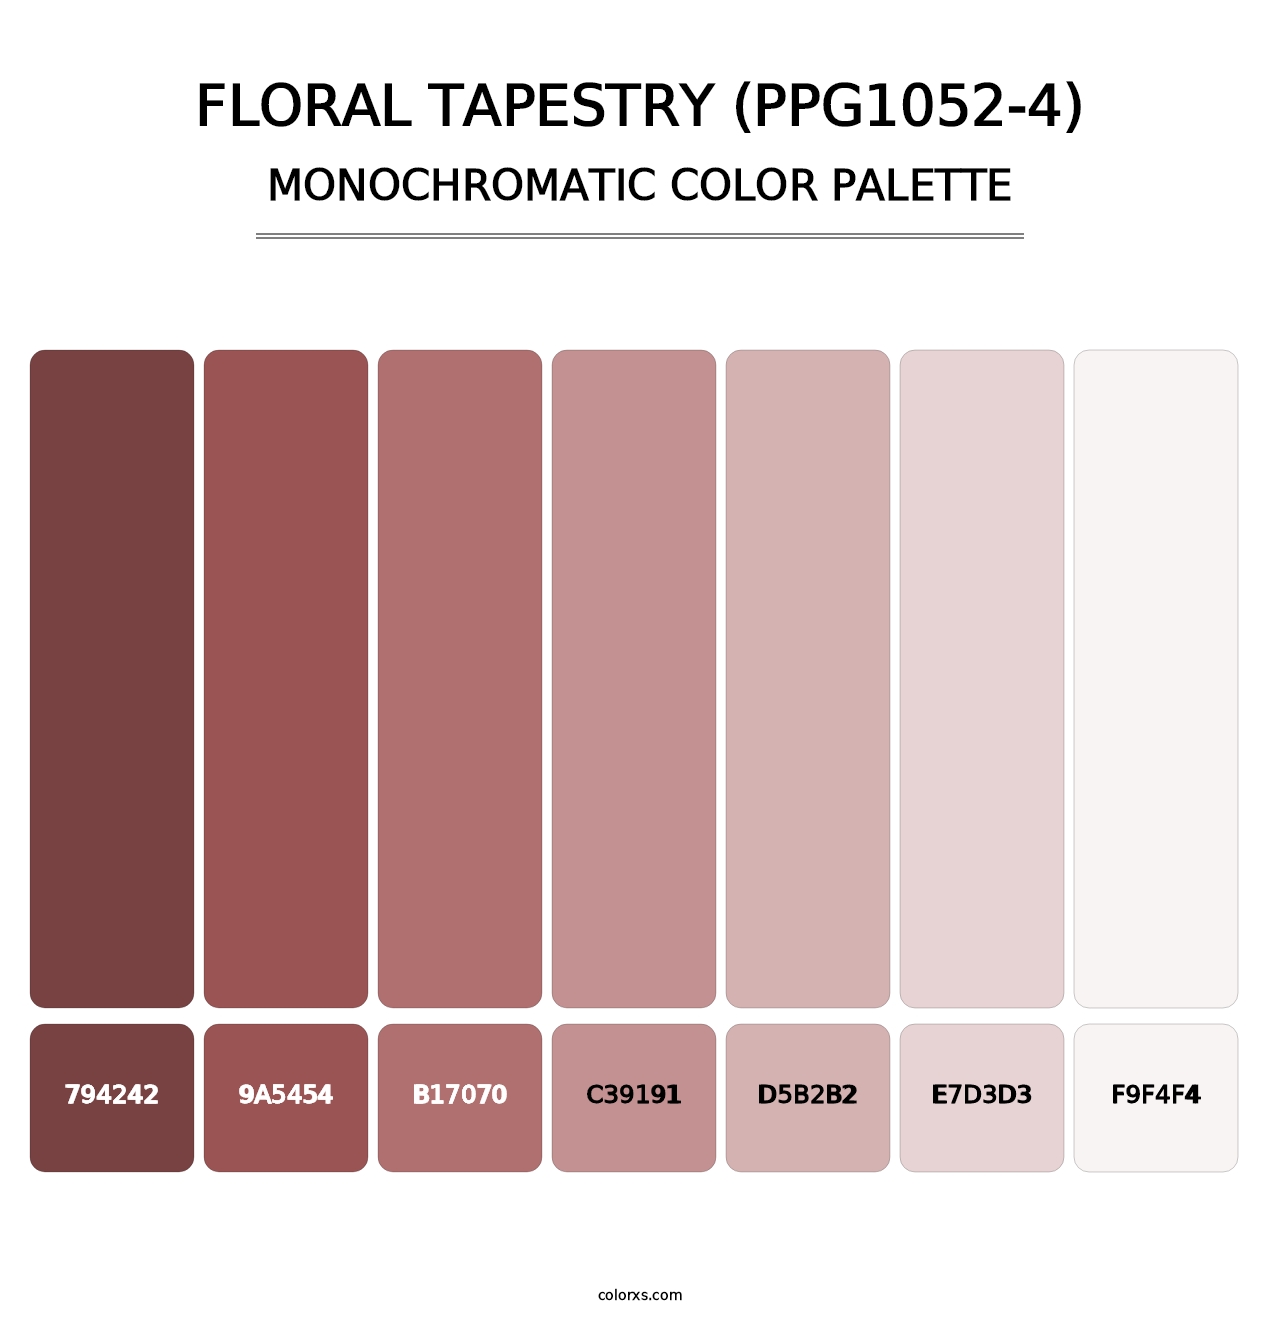 Floral Tapestry (PPG1052-4) - Monochromatic Color Palette